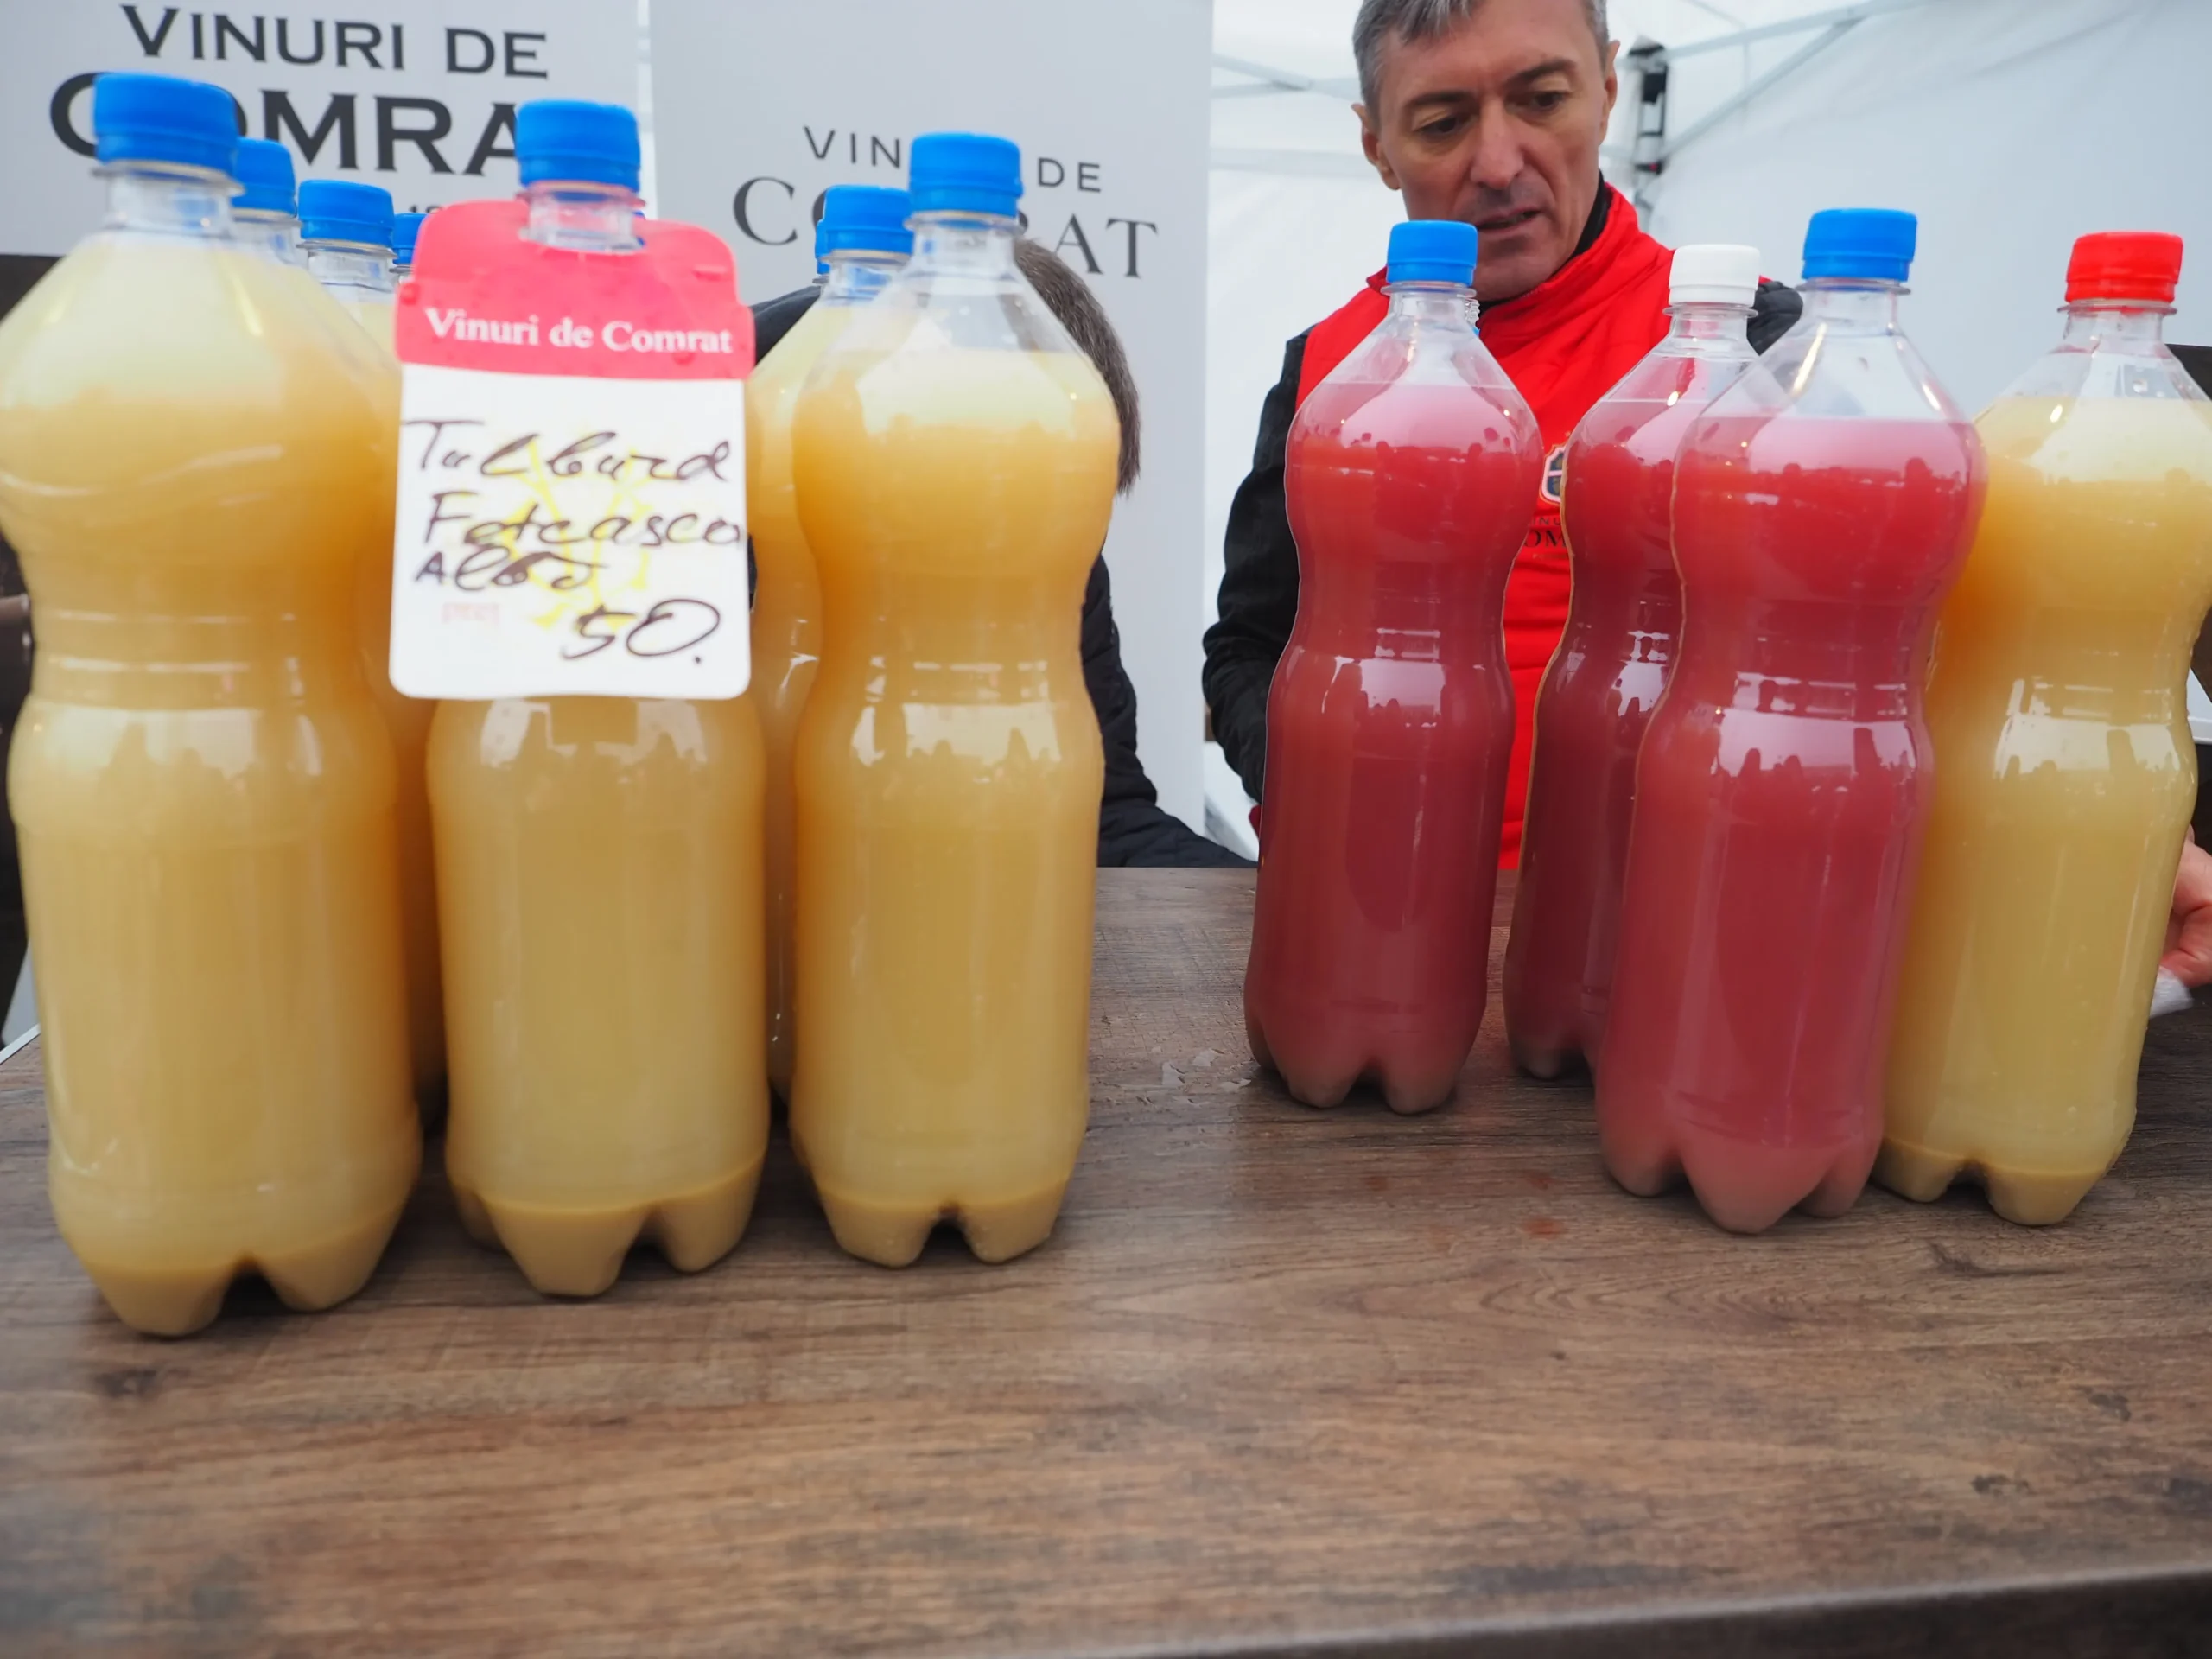 This fresh grape juice sold in plastic bottles is like Moldovans’ own Coca-Cola.